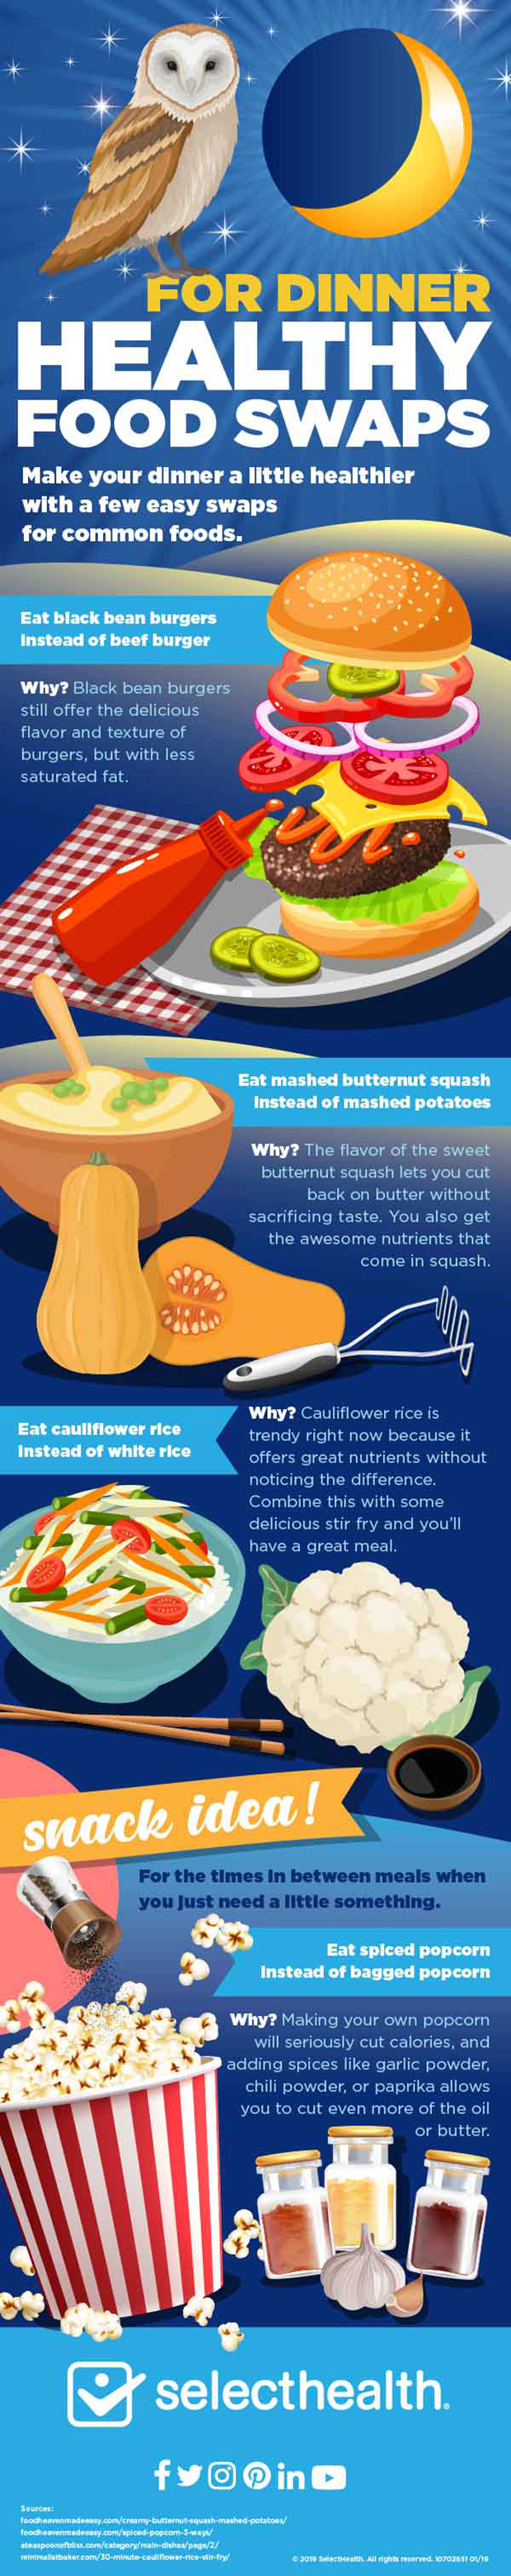 Infographic with examples of healthy food swaps for dinner